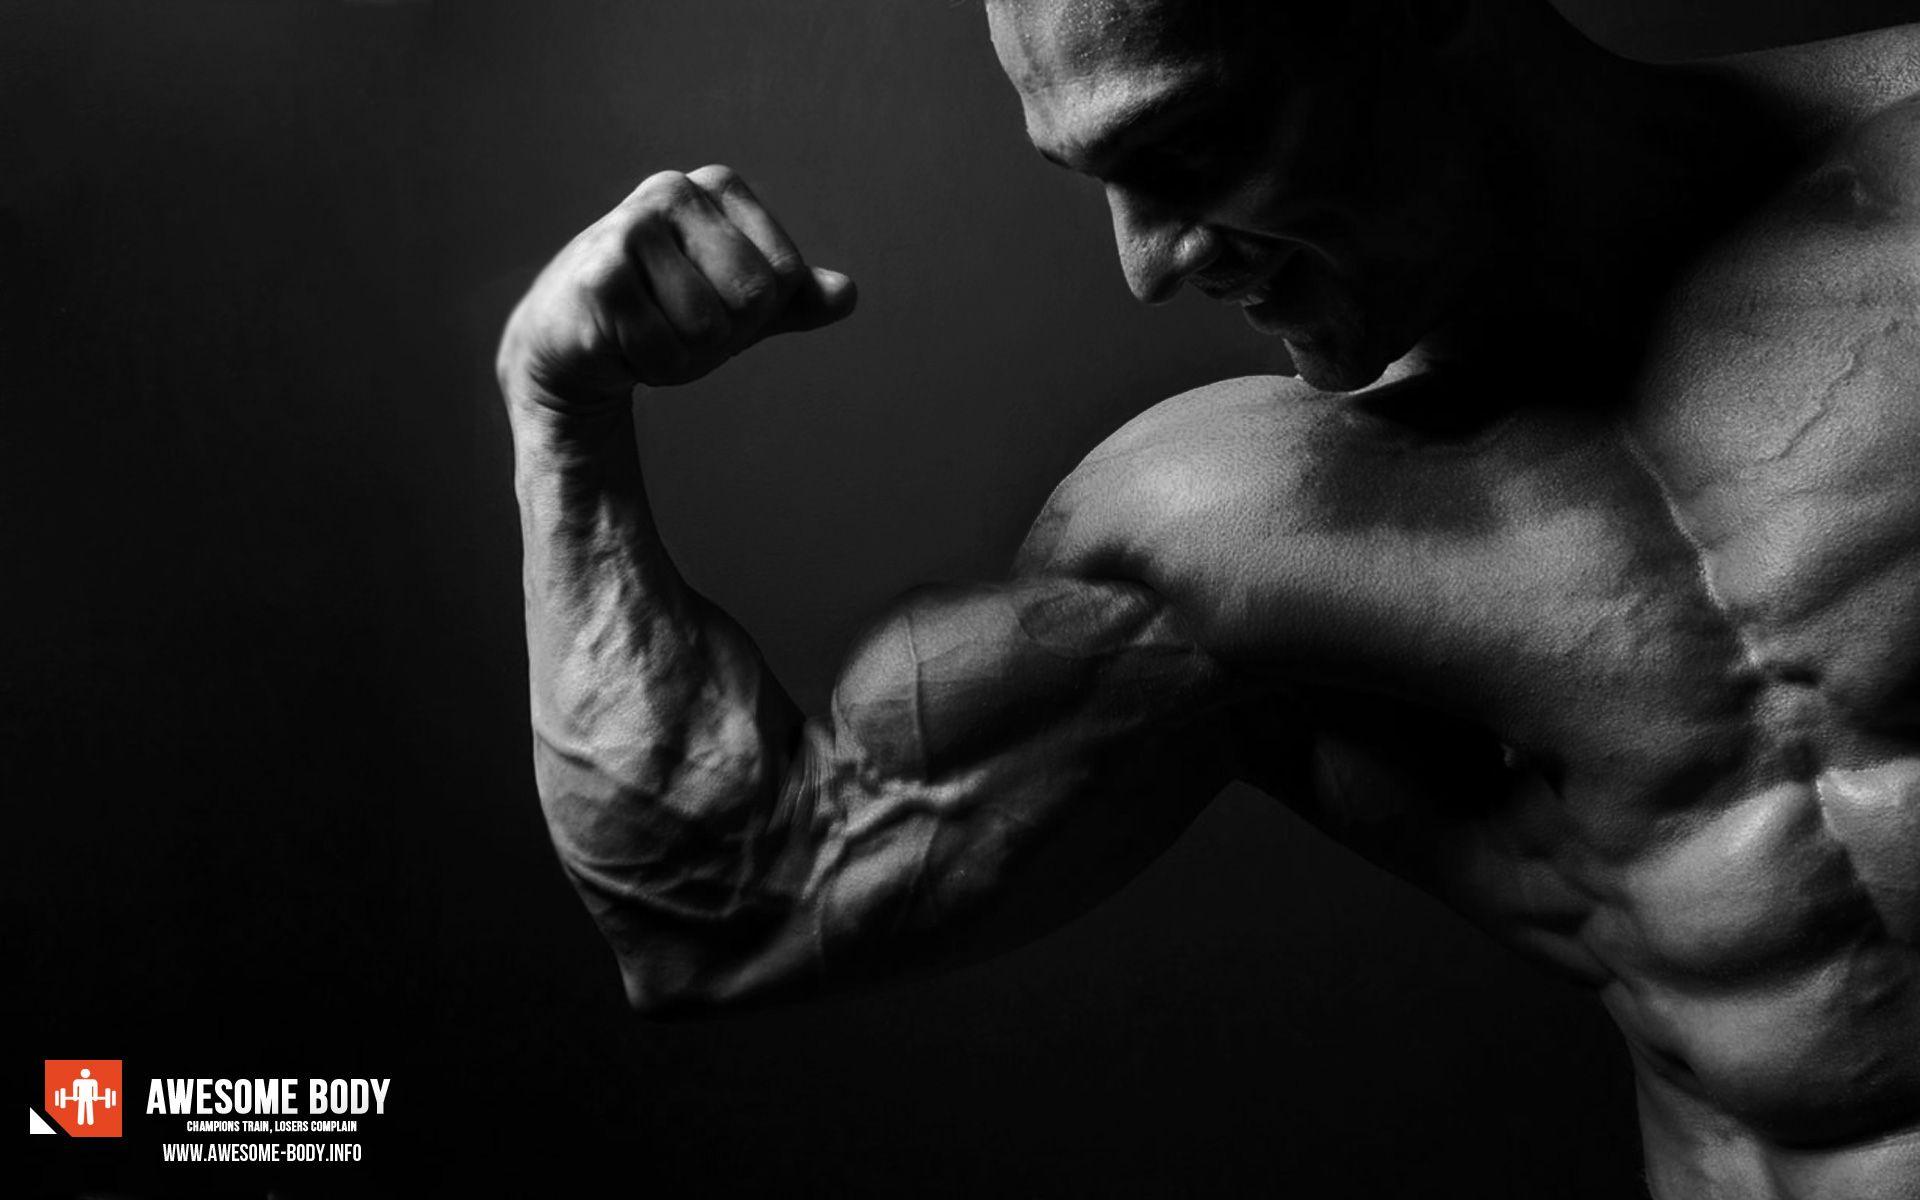 Bodybuilding Wallpaper Widescreen. Look at my biceps. Awesome body